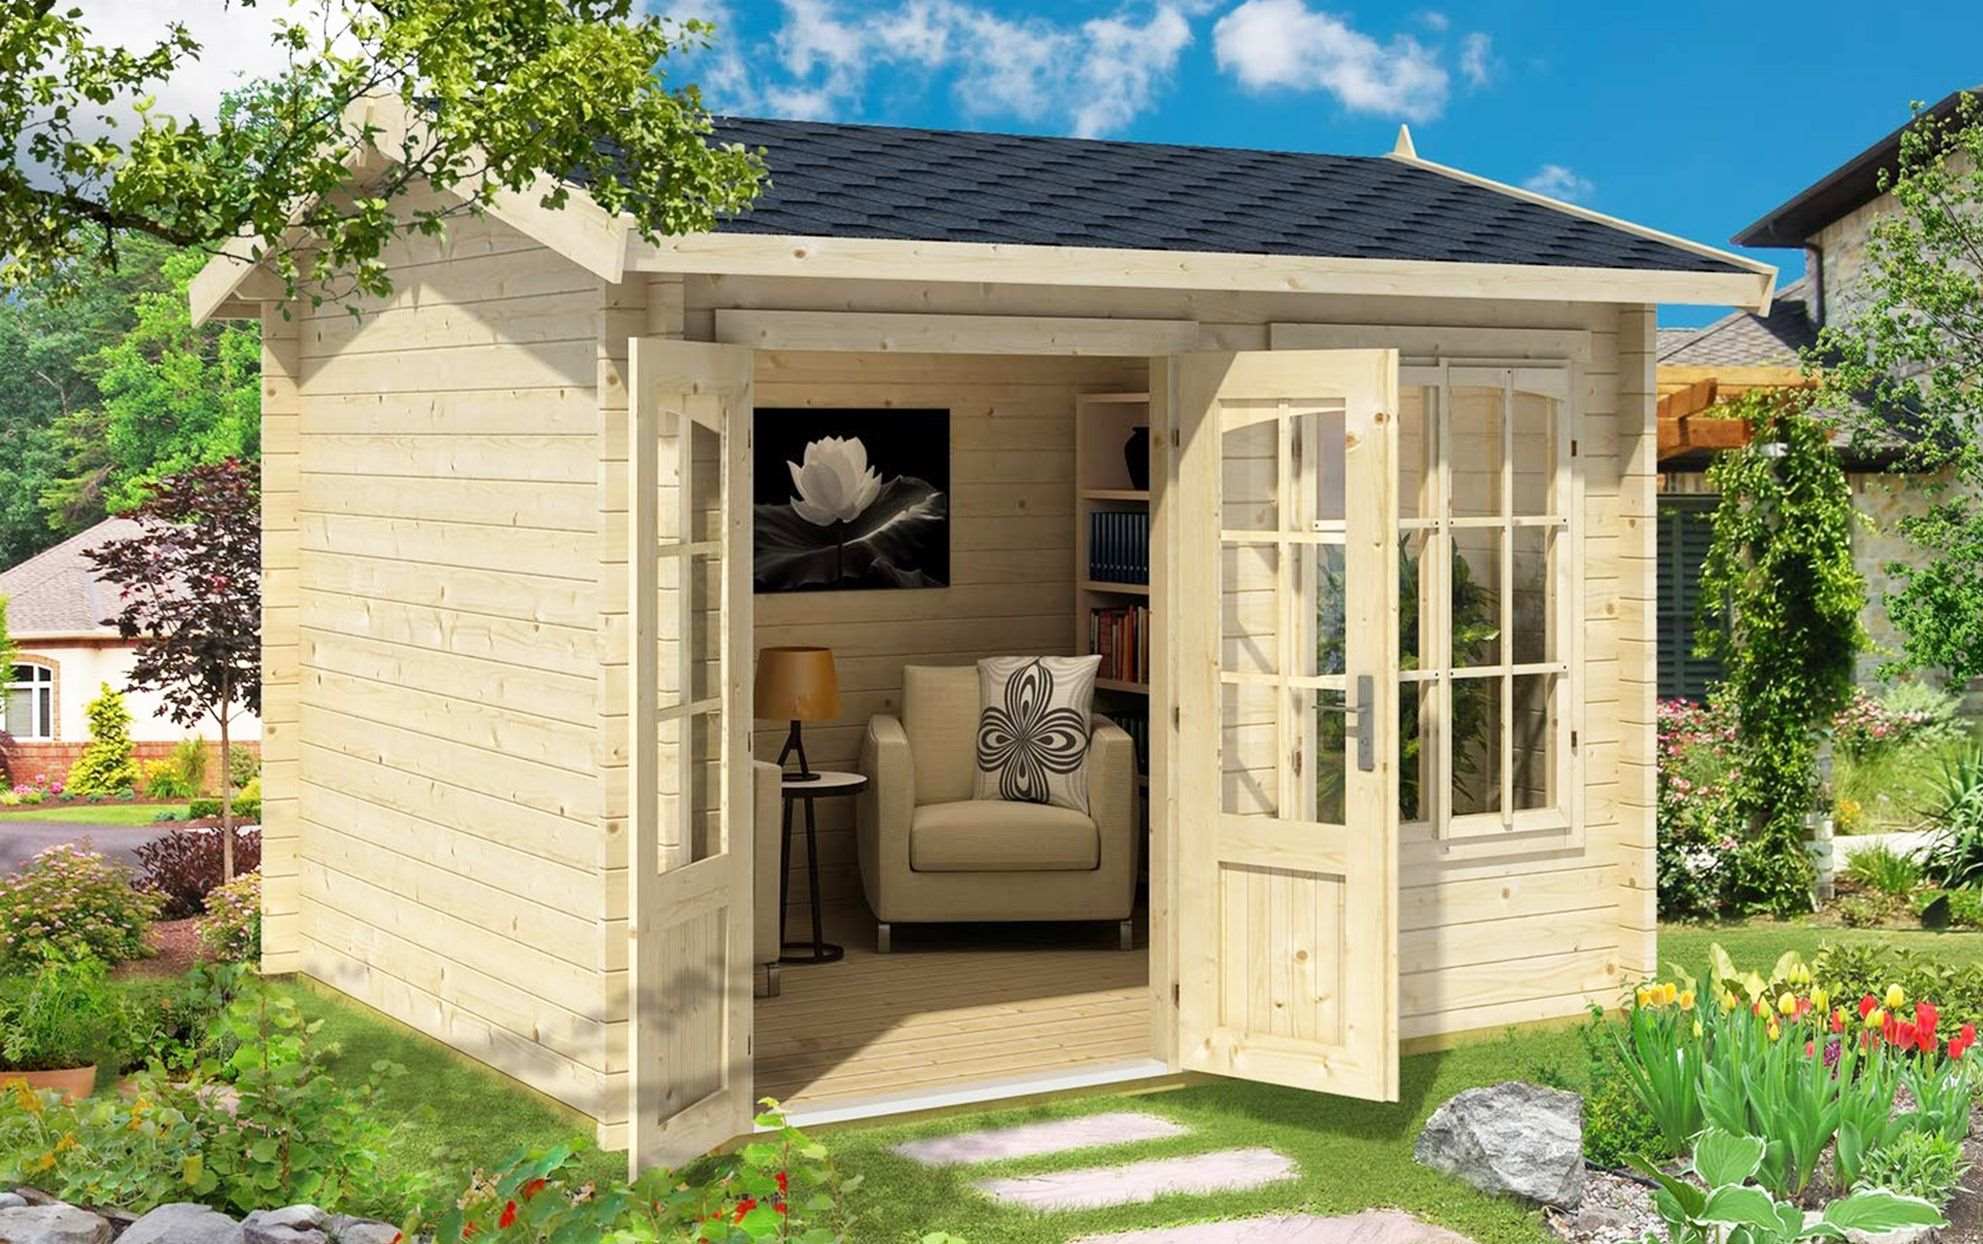 How To Build A Tiny House In Your Backyard